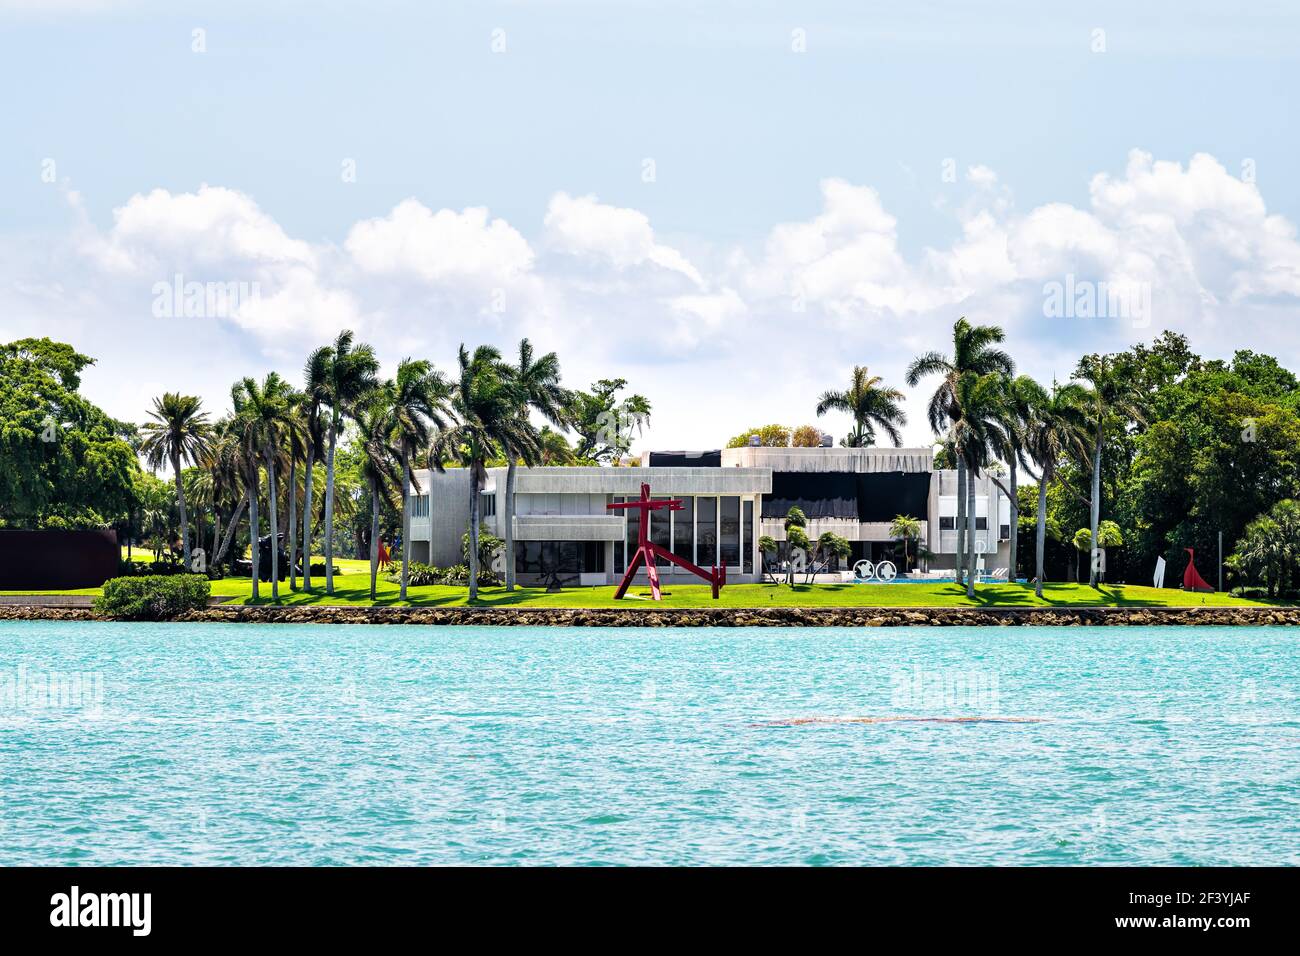 Bal Harbour, USA - May 8, 2018: Miami, Florida at Biscayne Bay Intracoastal water and view of Indian Creek Billionaire island house waterfront oceanfr Stock Photo